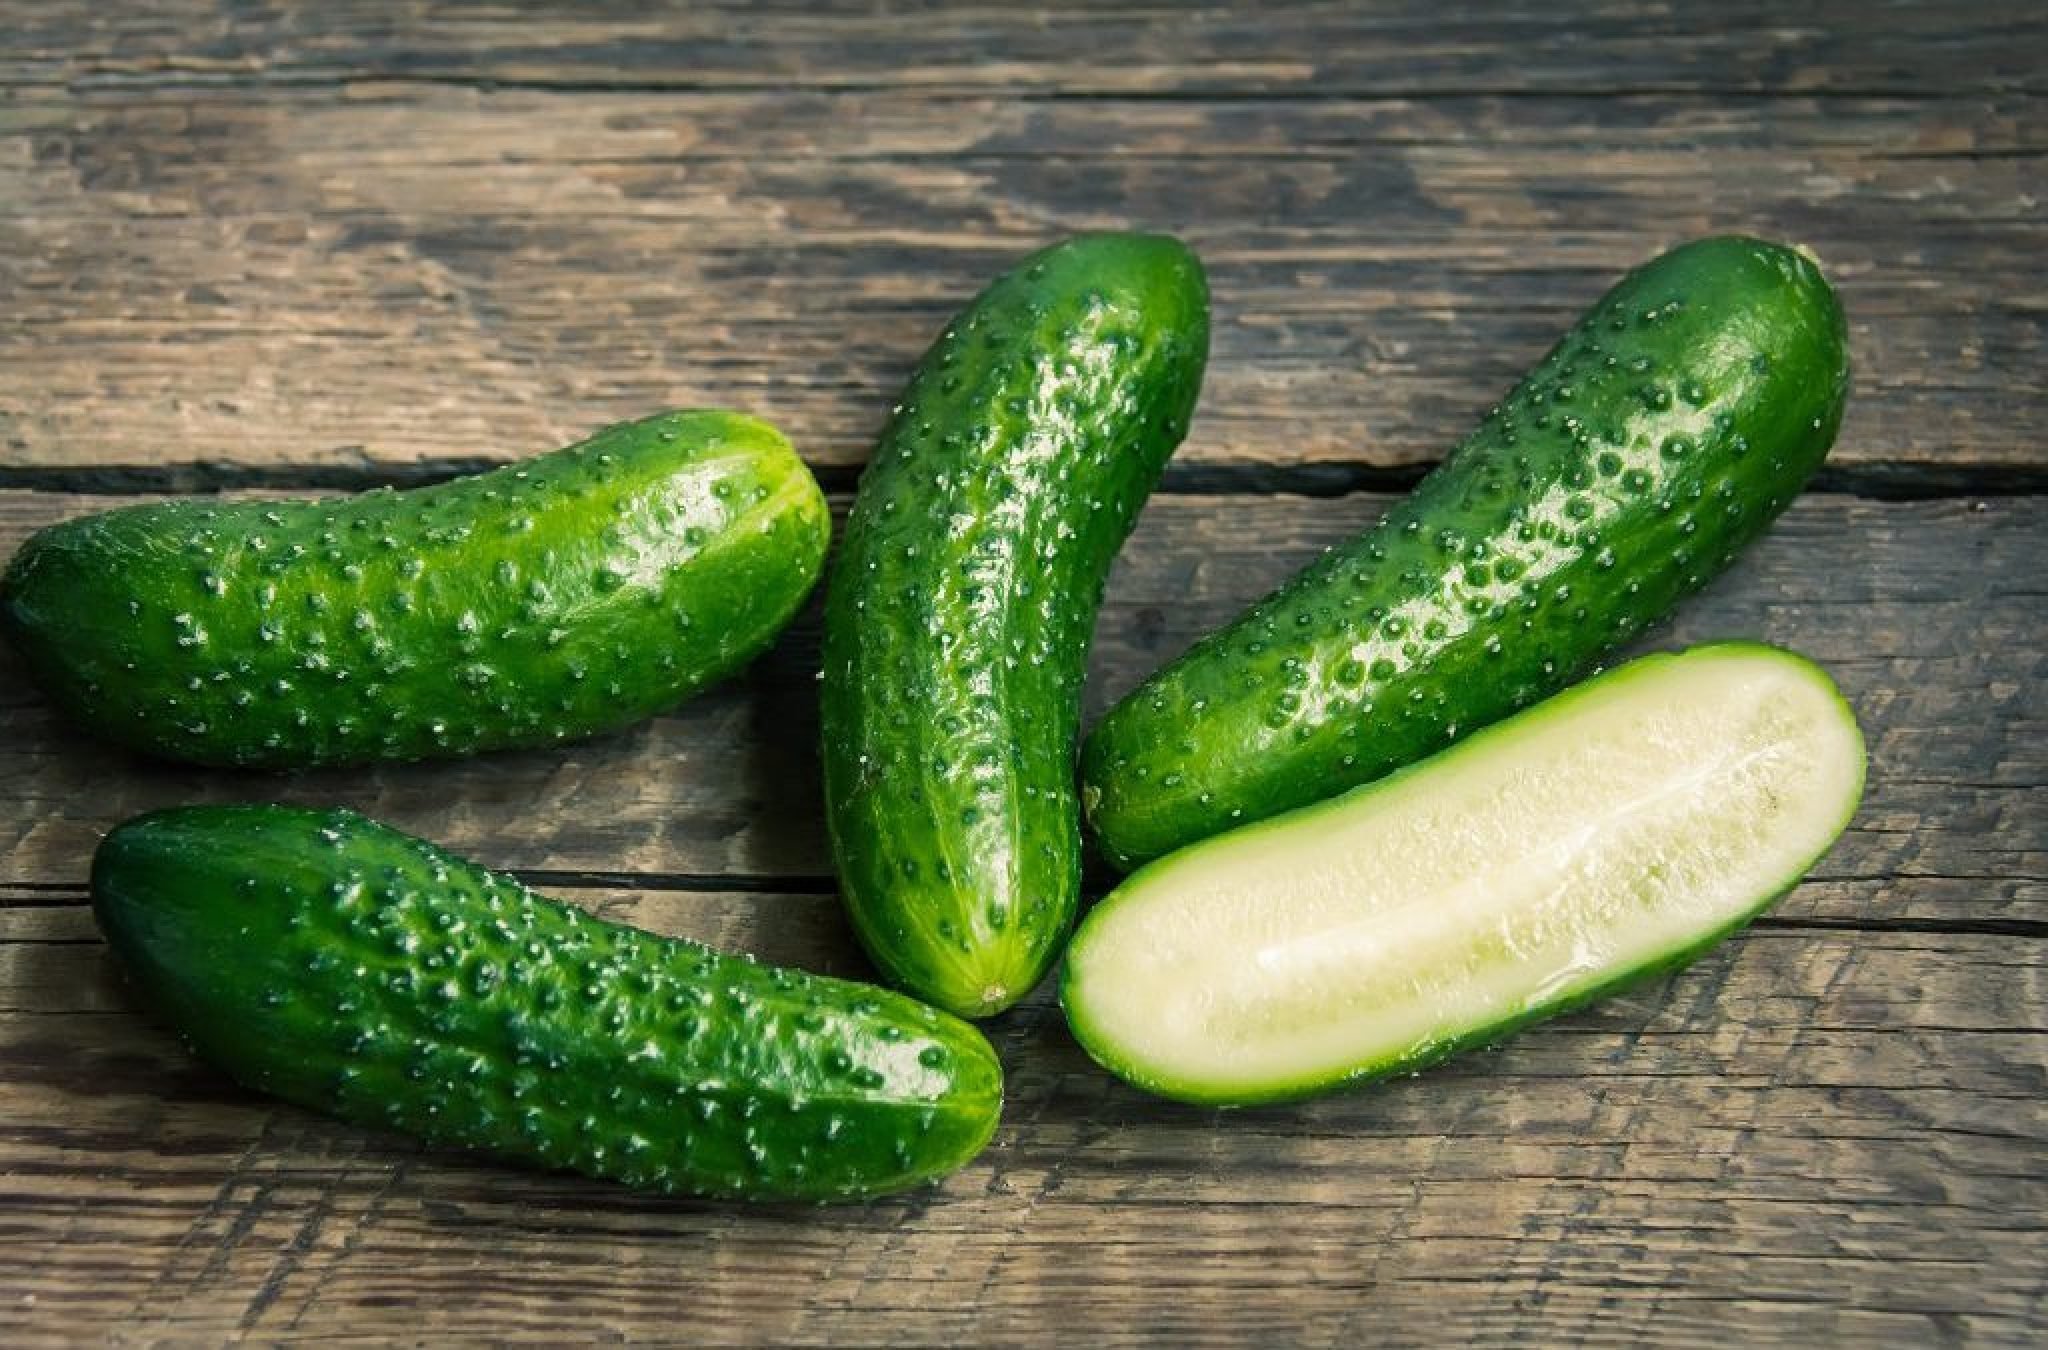 TOP 5 mistakes everyone makes when pickling cucumbers